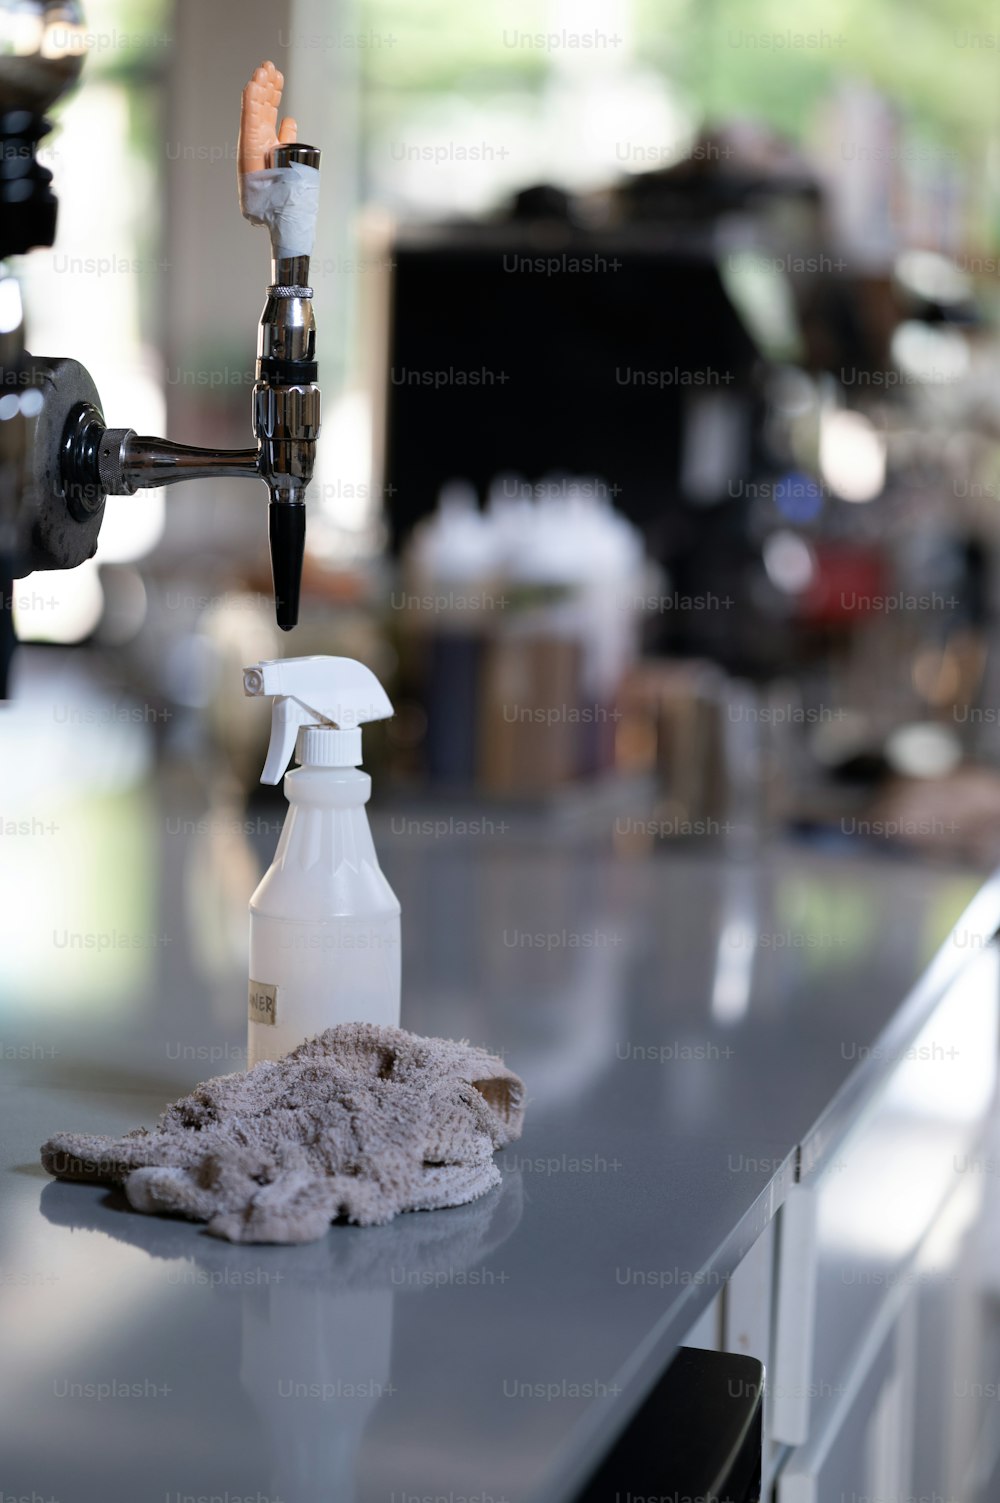 a white spray bottle sitting on top of a counter